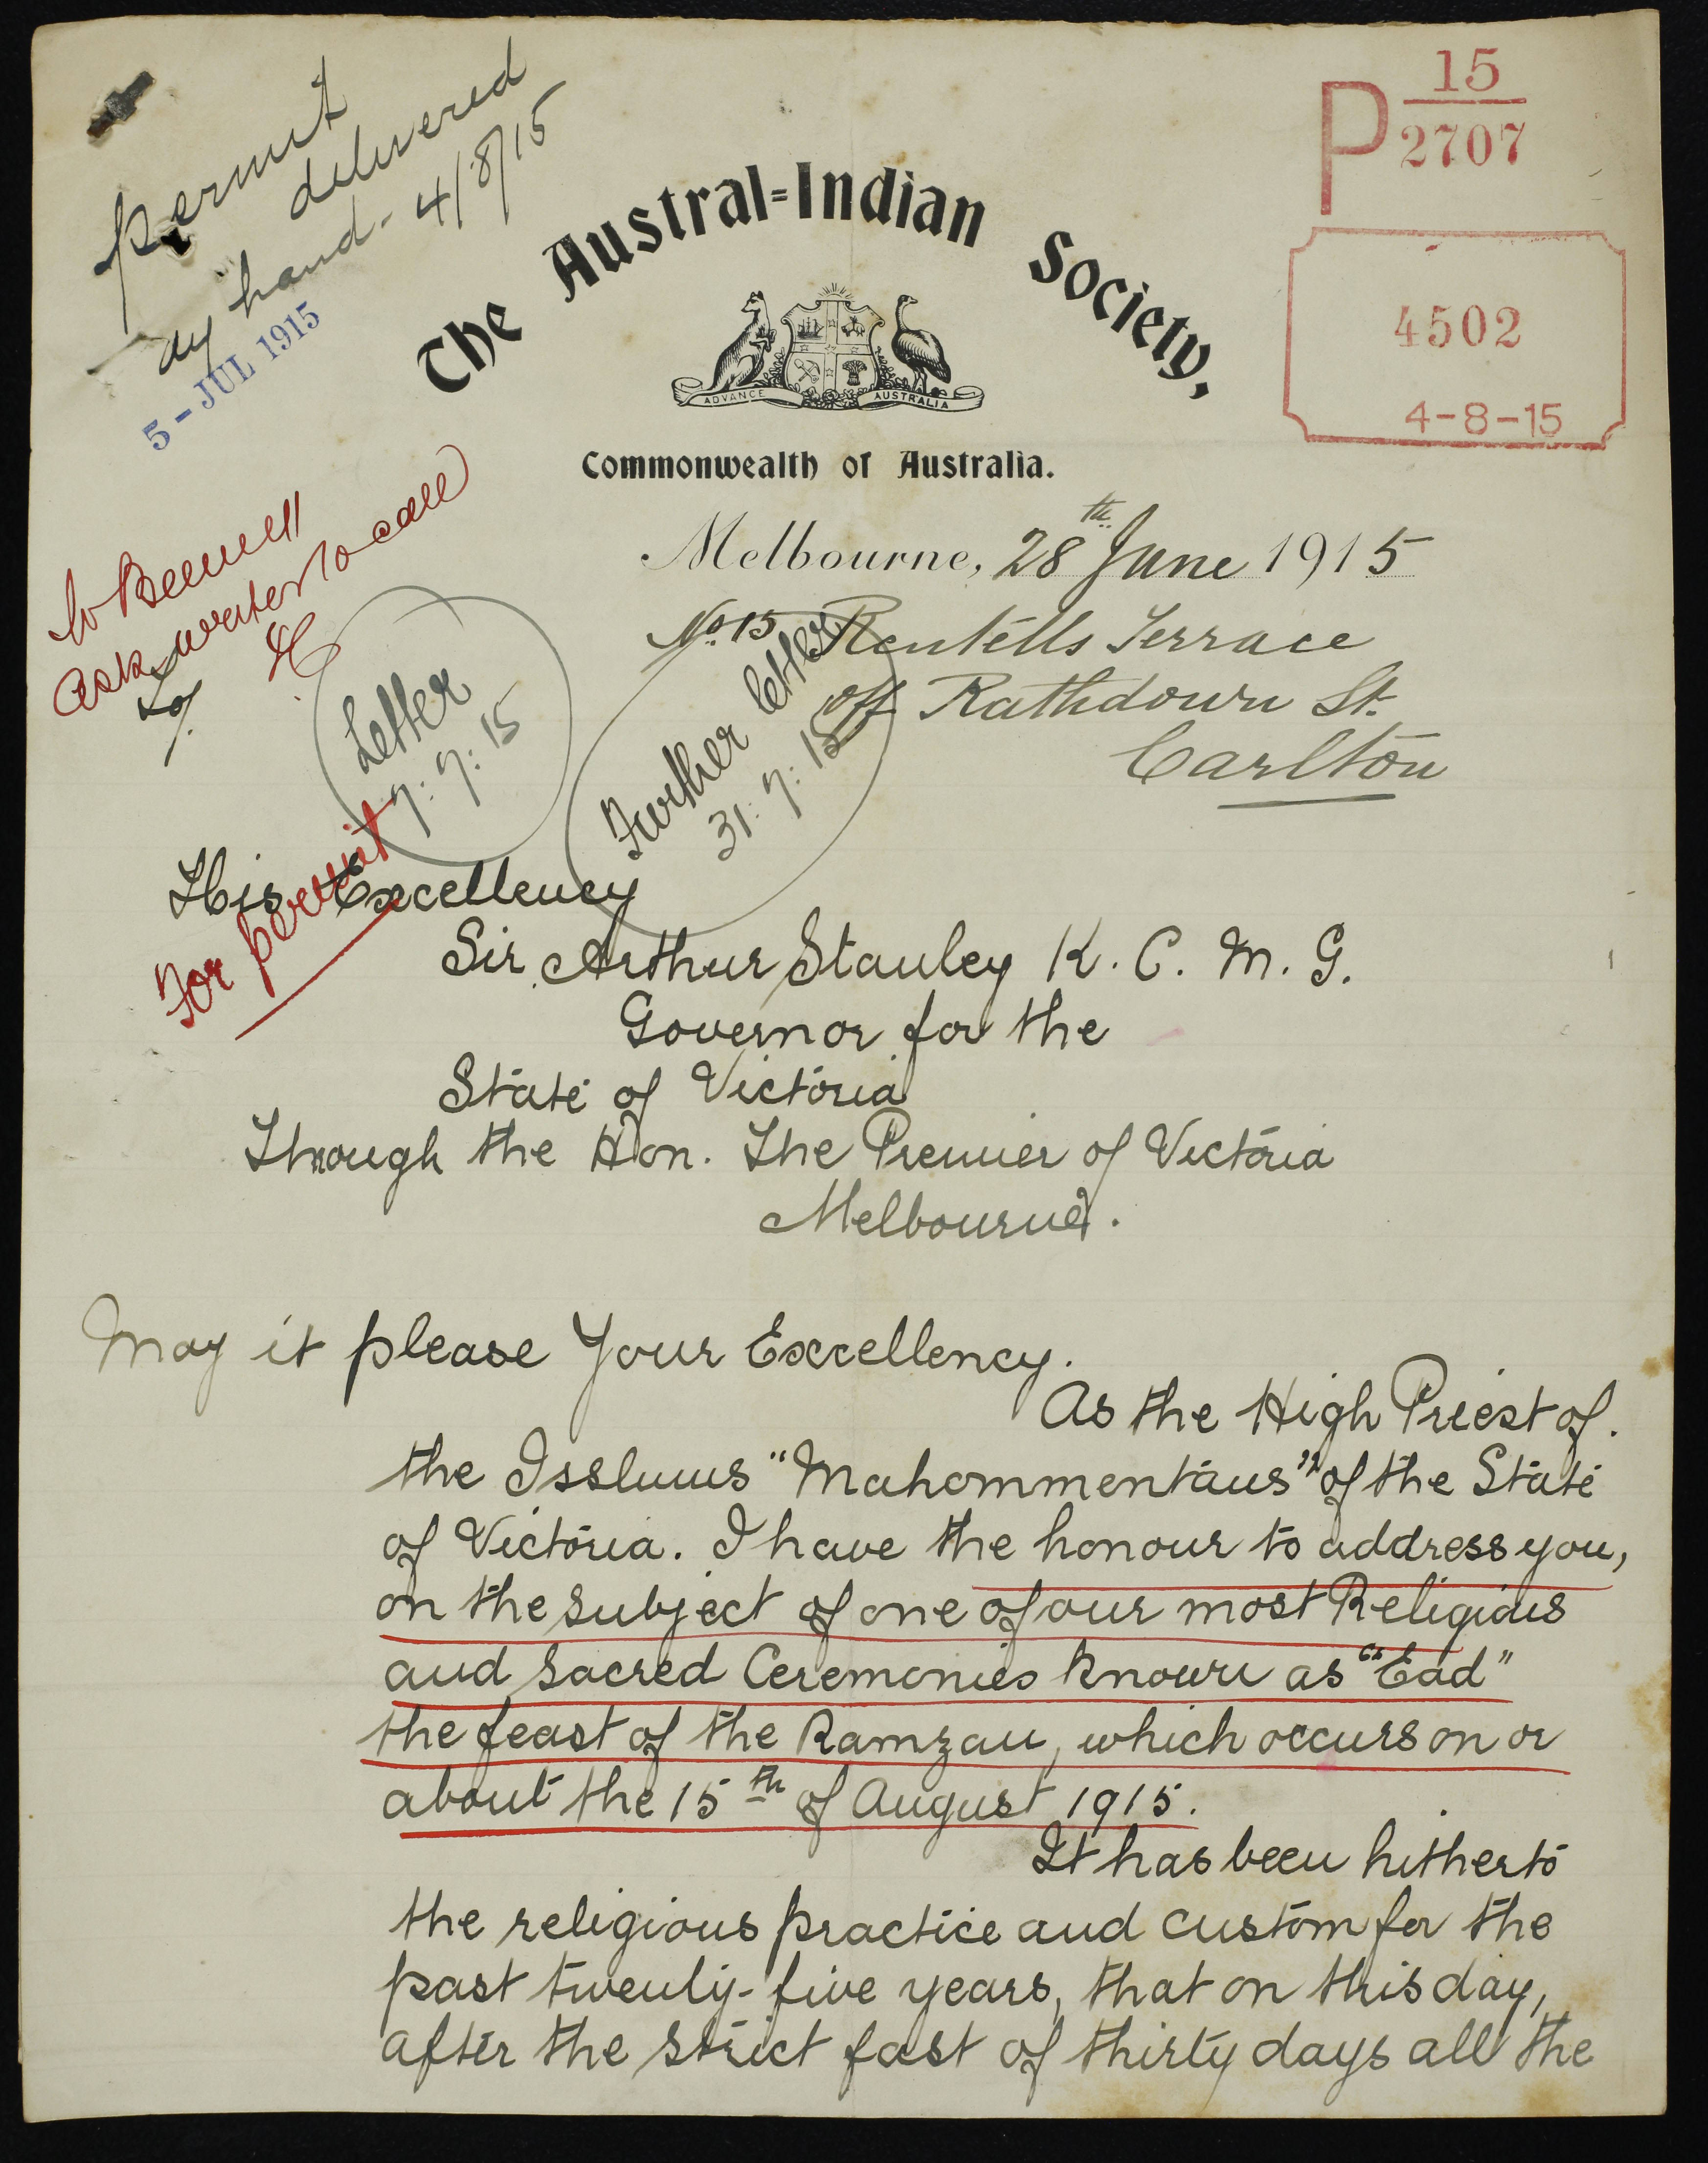 Image of first page of letter from the Austral Indian Society to Governor of Victoria regarding Eid celebrations, 28 June 1915.